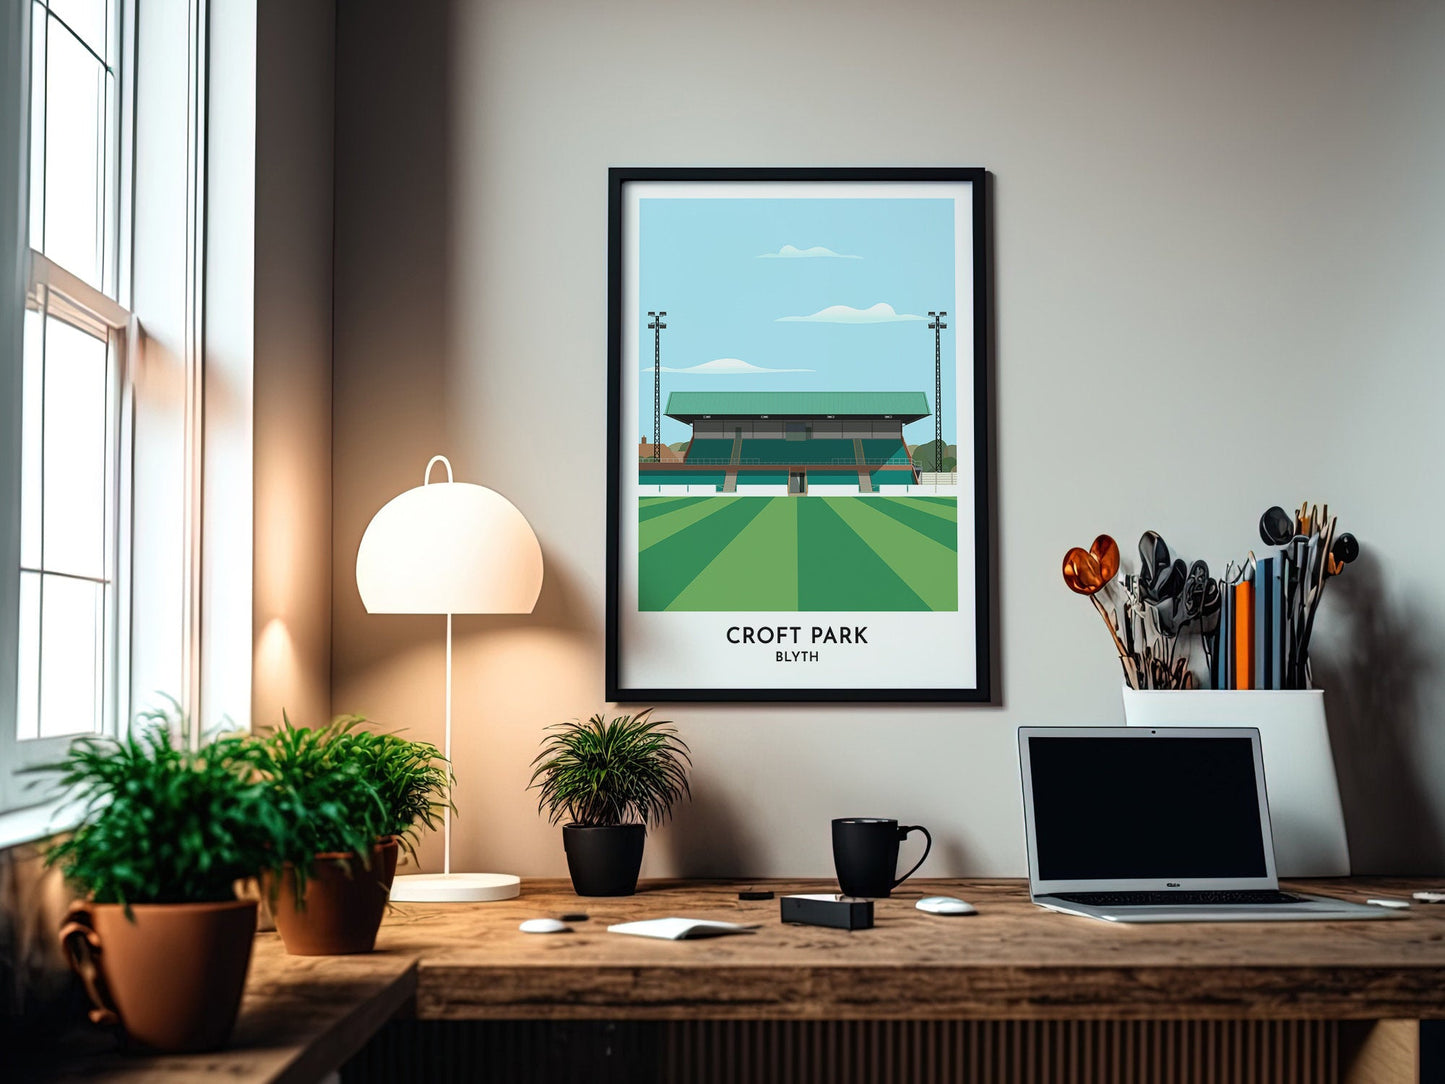 Blyth Spartans fc Print Gift - Croft Park Illustrated Poster - Gift for Him - Gift for Her - Birthday Present - Football Art Poster - Turf Football Art